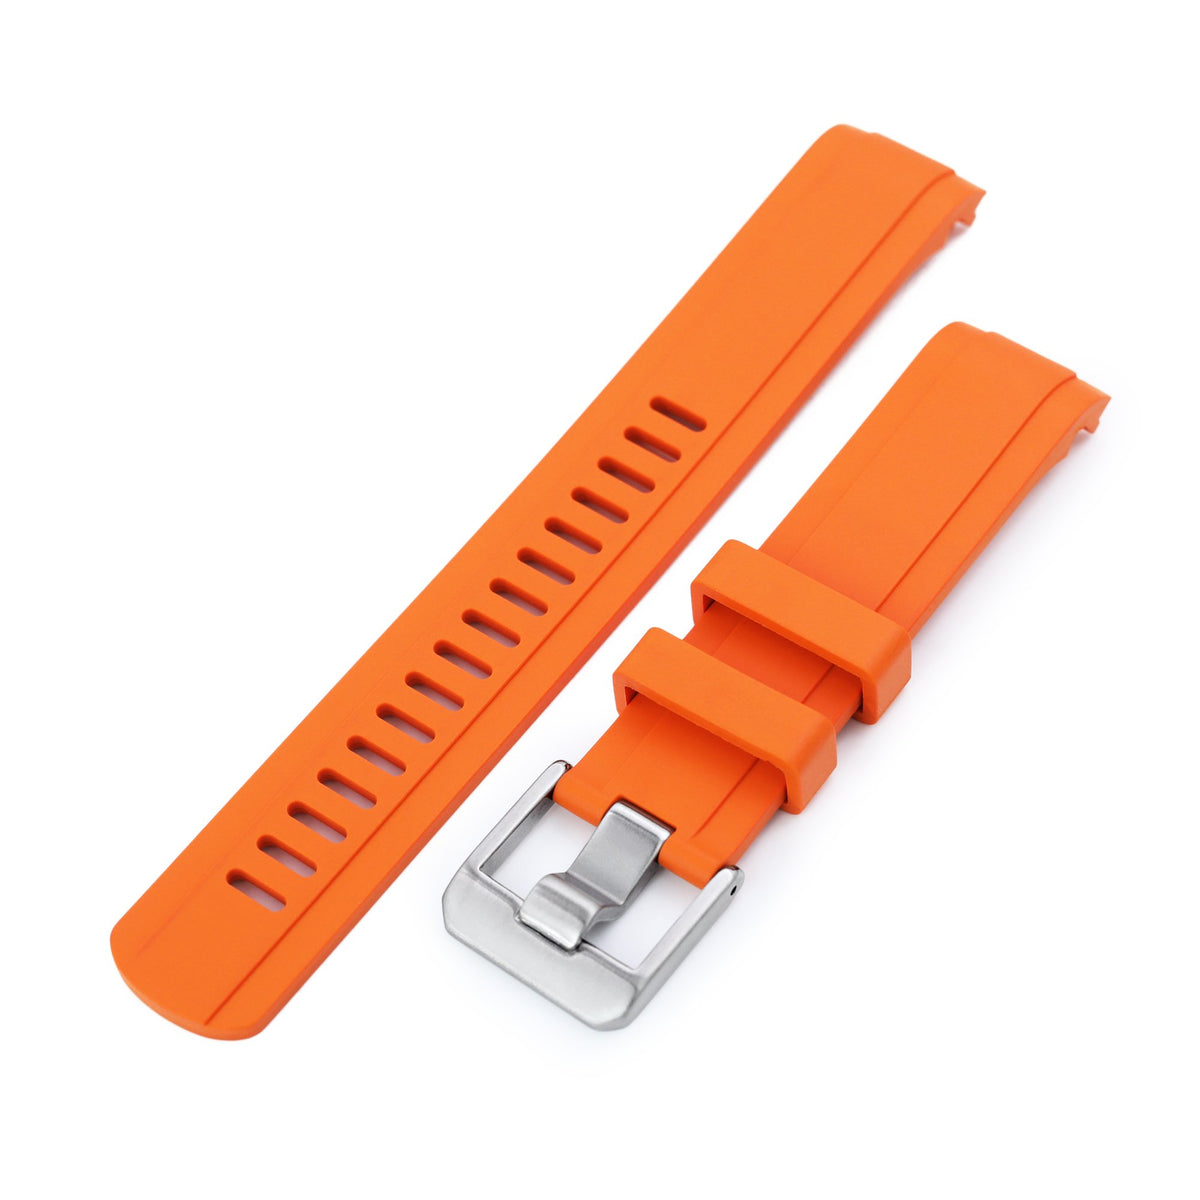 20mm Crafter Blue - Orange Rubber Curved Lug Watch Strap for Seiko Baby MM200 &amp; Mini Turtles SRPC35 Strapcode Watch Bands